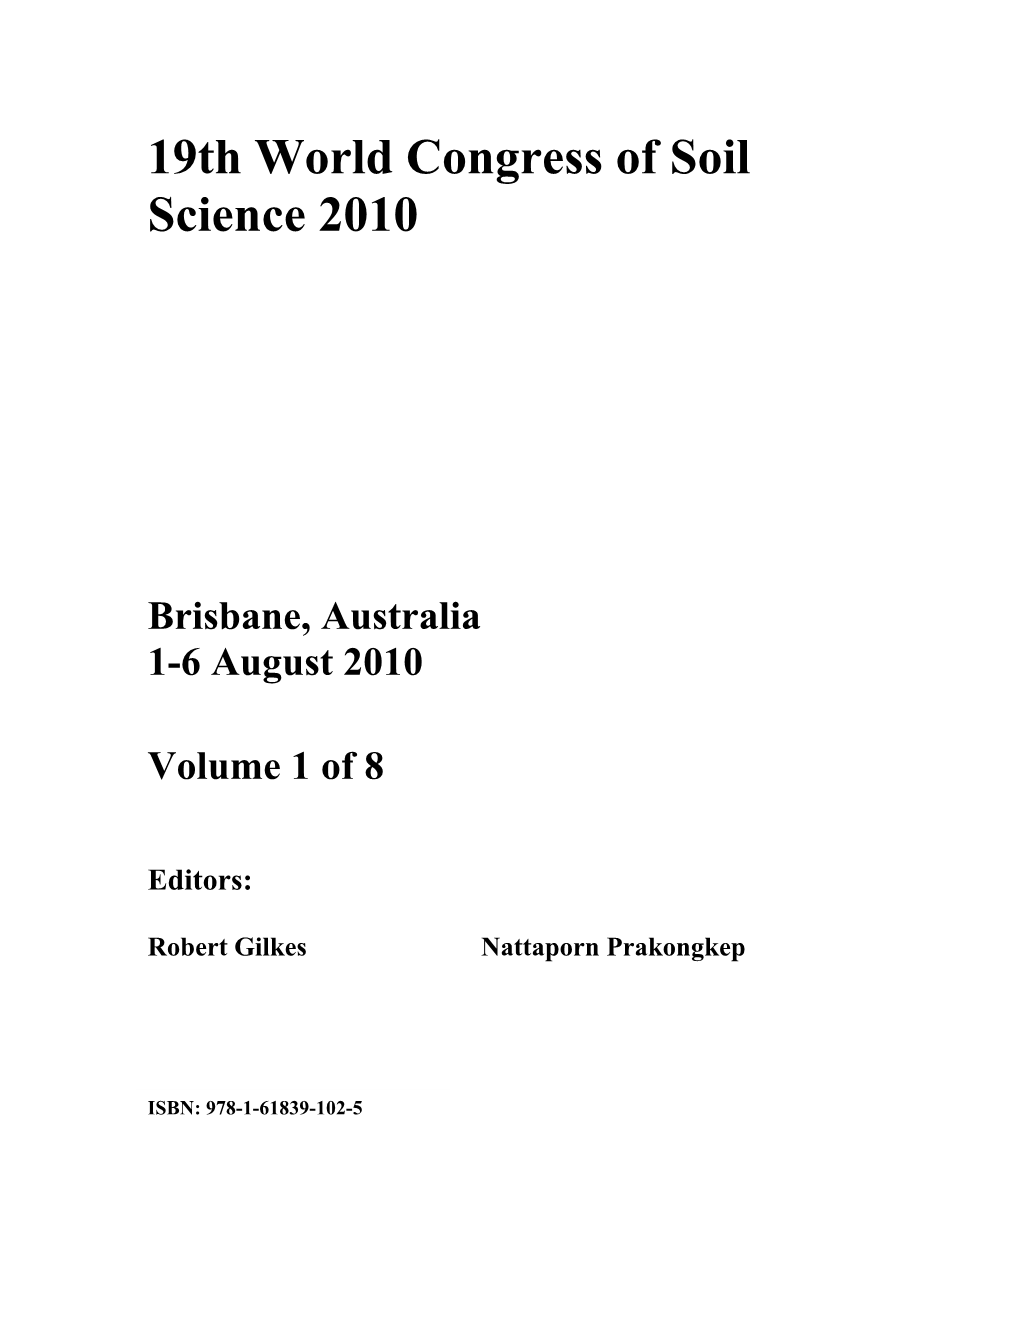 19Th World Congress of Soil Science 2010